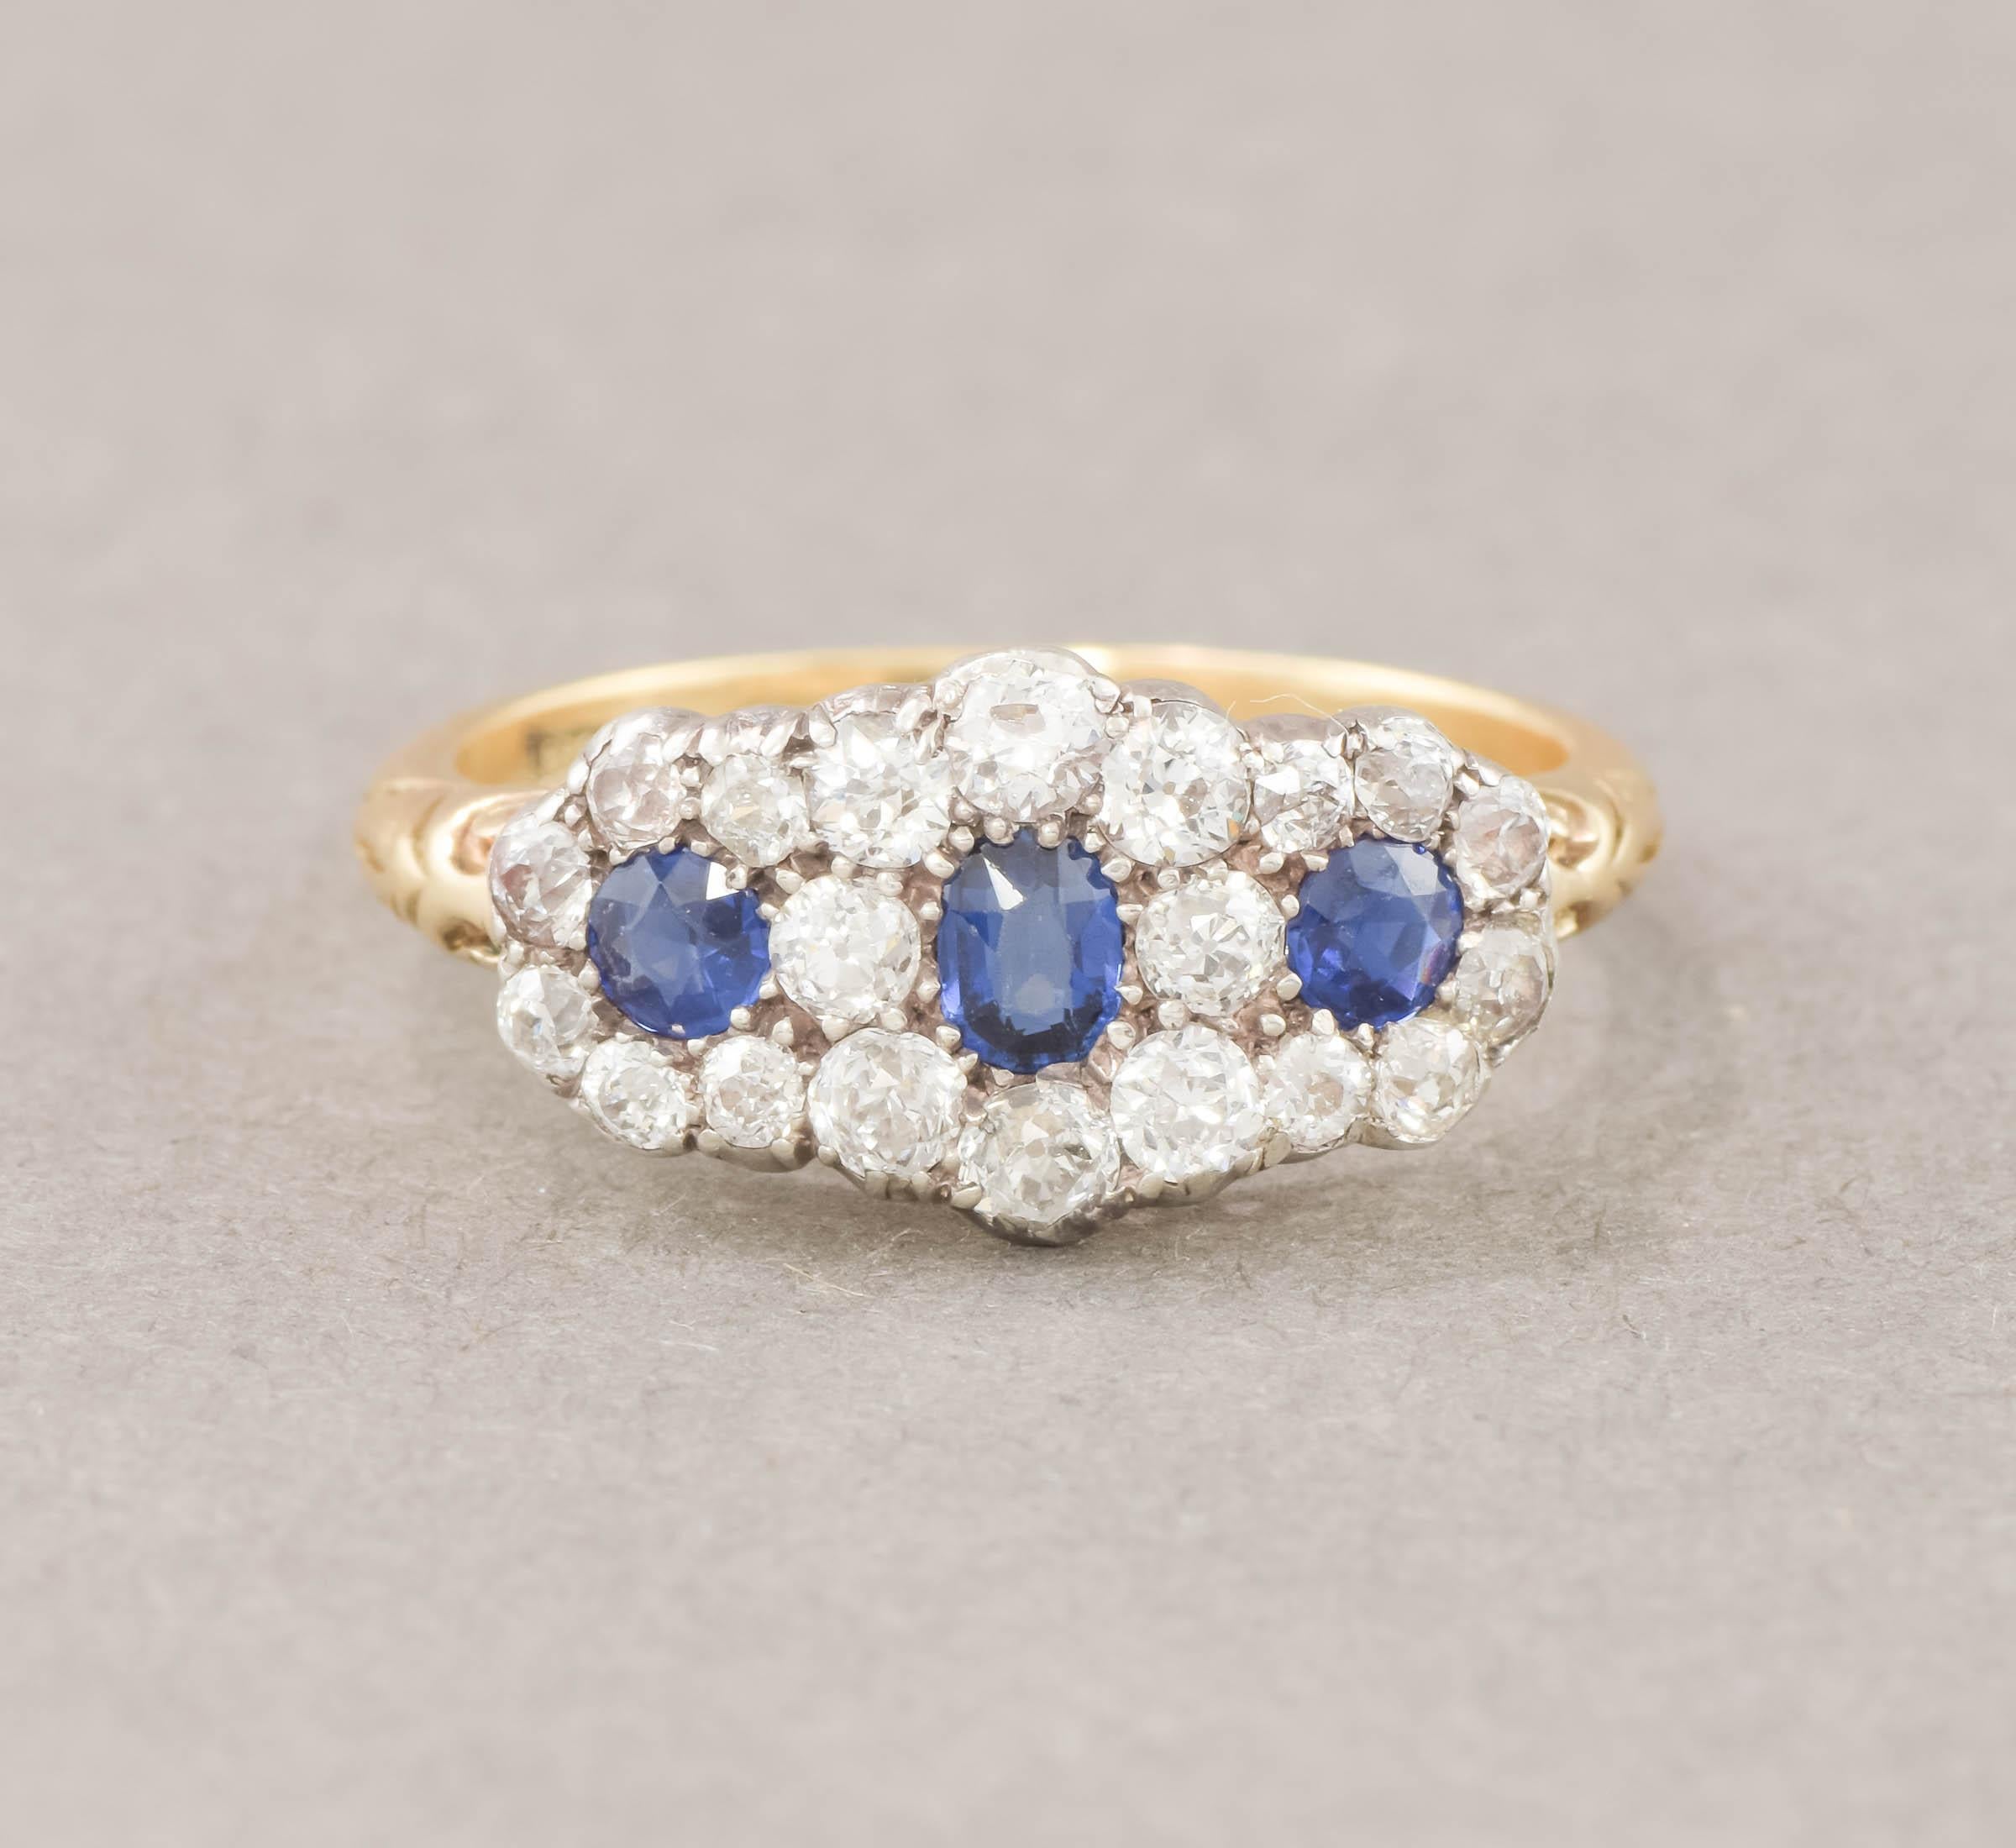 Offered is an elegant & extremely sparkly late Victorian Old European Cut Diamond and Blue Sapphire Ring.

Estimated at approximately 1.20 carats of bright and fiery old cut diamonds and approximately .56 carats of old cut blue sapphires set in